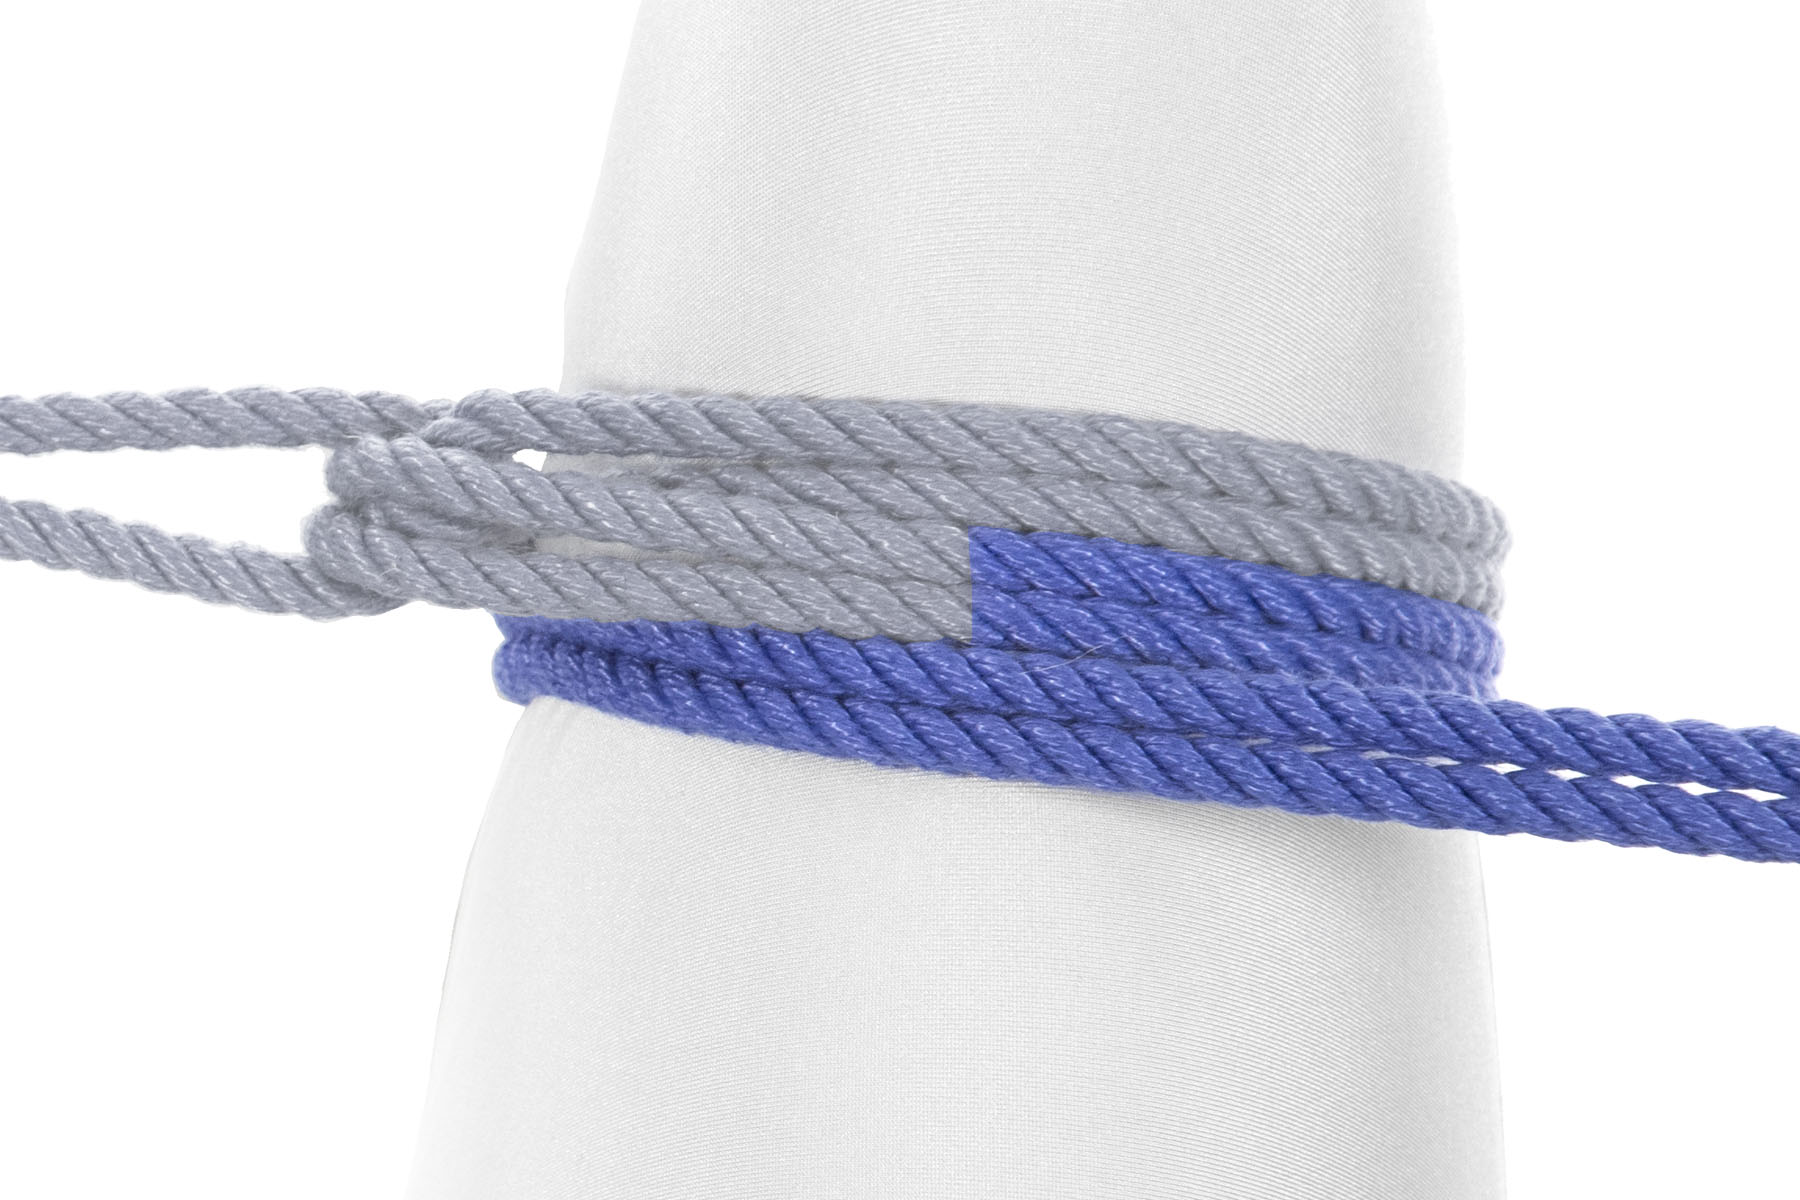 The rope makes a second wrap around the leg, lying against the first wrap on the side closer to the person’s body. This wrap does not go between the two halves of the rope.